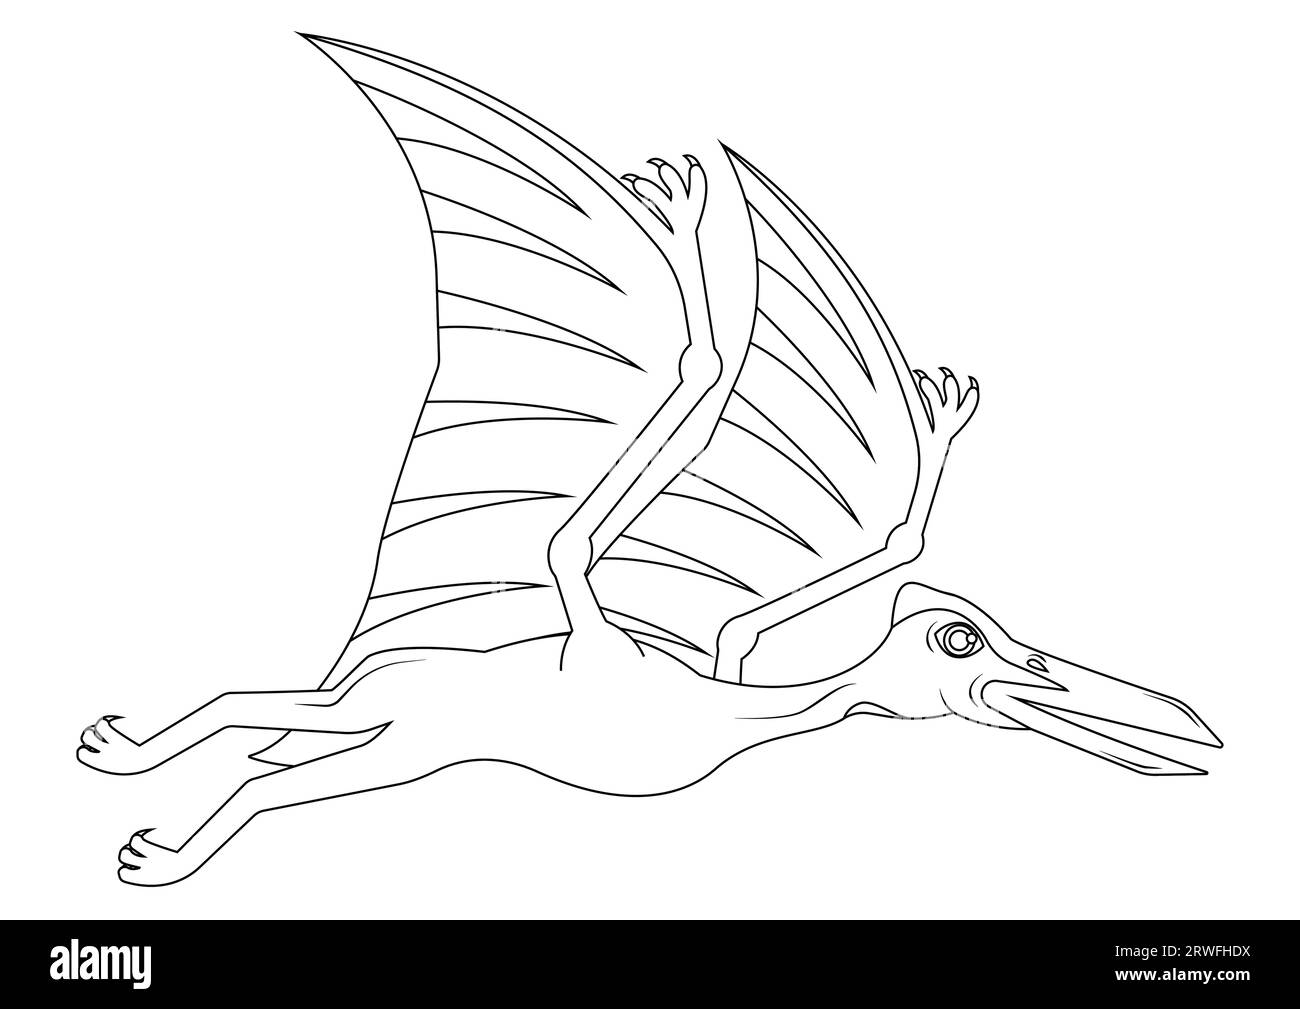 Black and White Quetzalcoatlus Dinosaur Cartoon Character Vector. Coloring Page of a Quetzalcoatlus Dinosaur Stock Vector